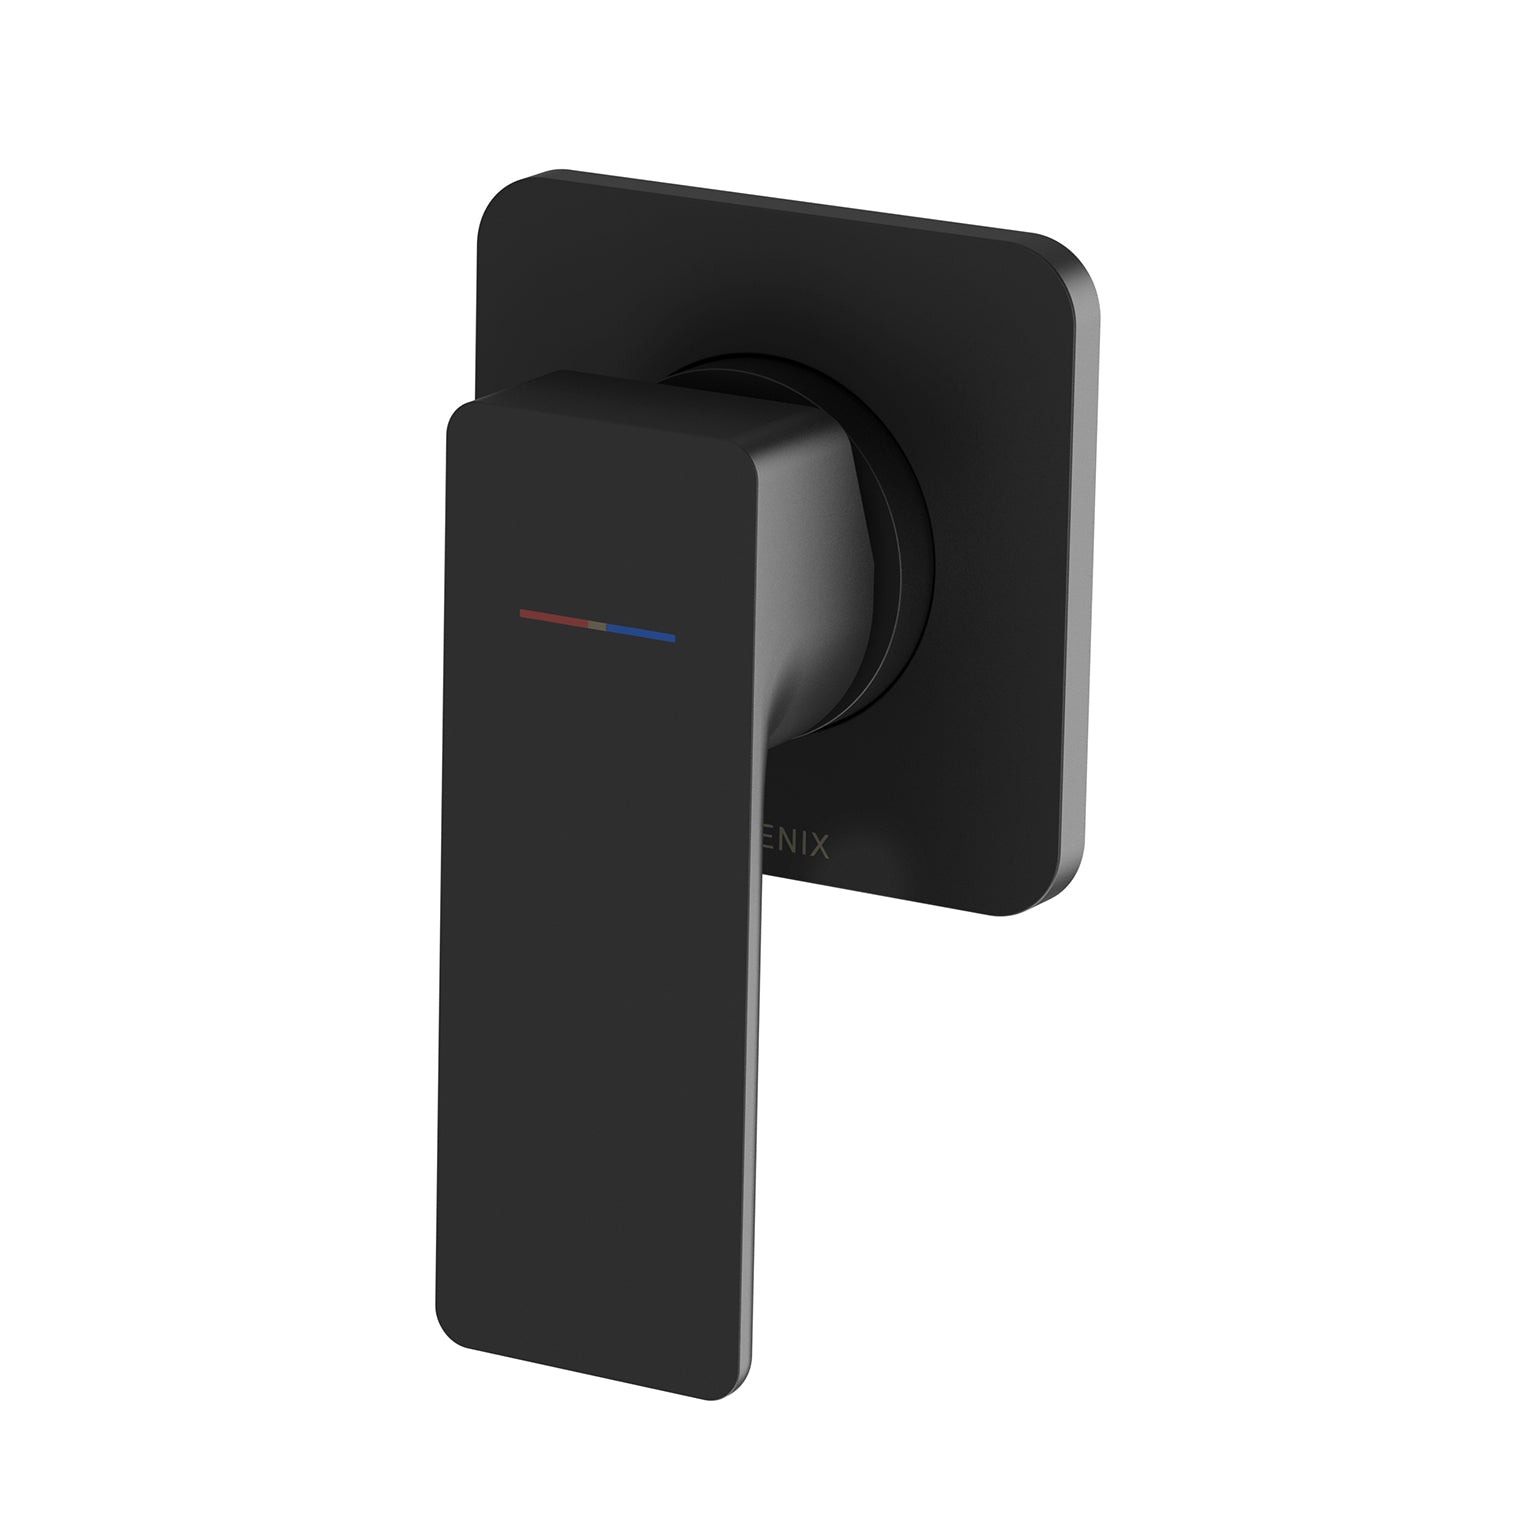 PHOENIX GLOSS MKII SWITCHMIX SHOWER / WALL MIXER FIT-OFF AND ROUGH-IN KIT MATTE BLACK